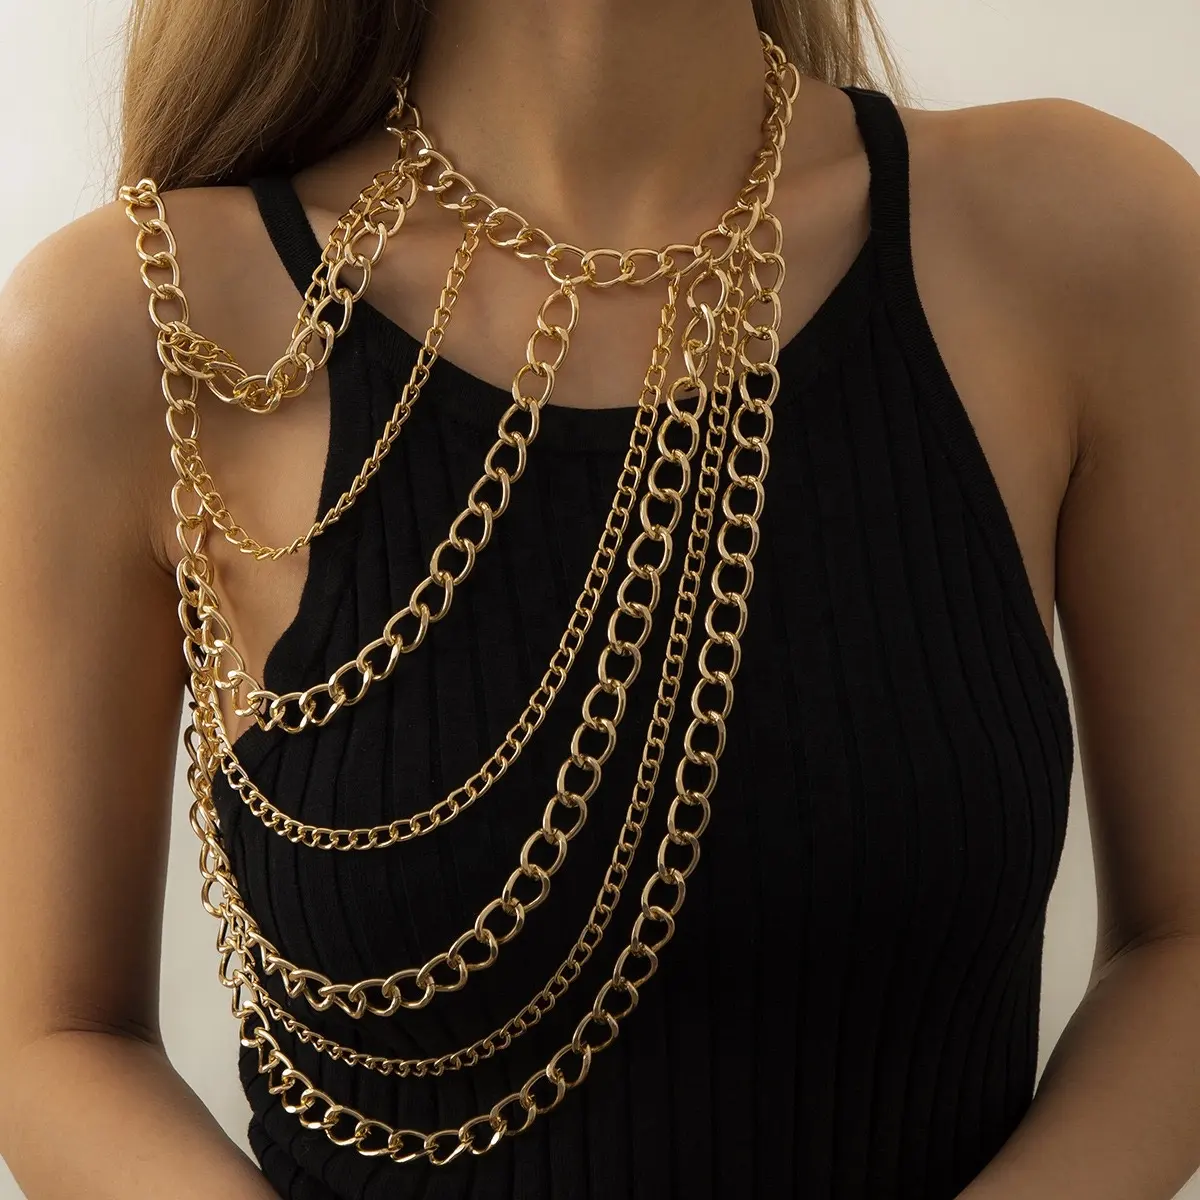 Trendy New Fashion Design Gold Color Body Chain 4-5 Layer Sexy Shoulders Waist Chains Jewelry For Women Girls Party Dress